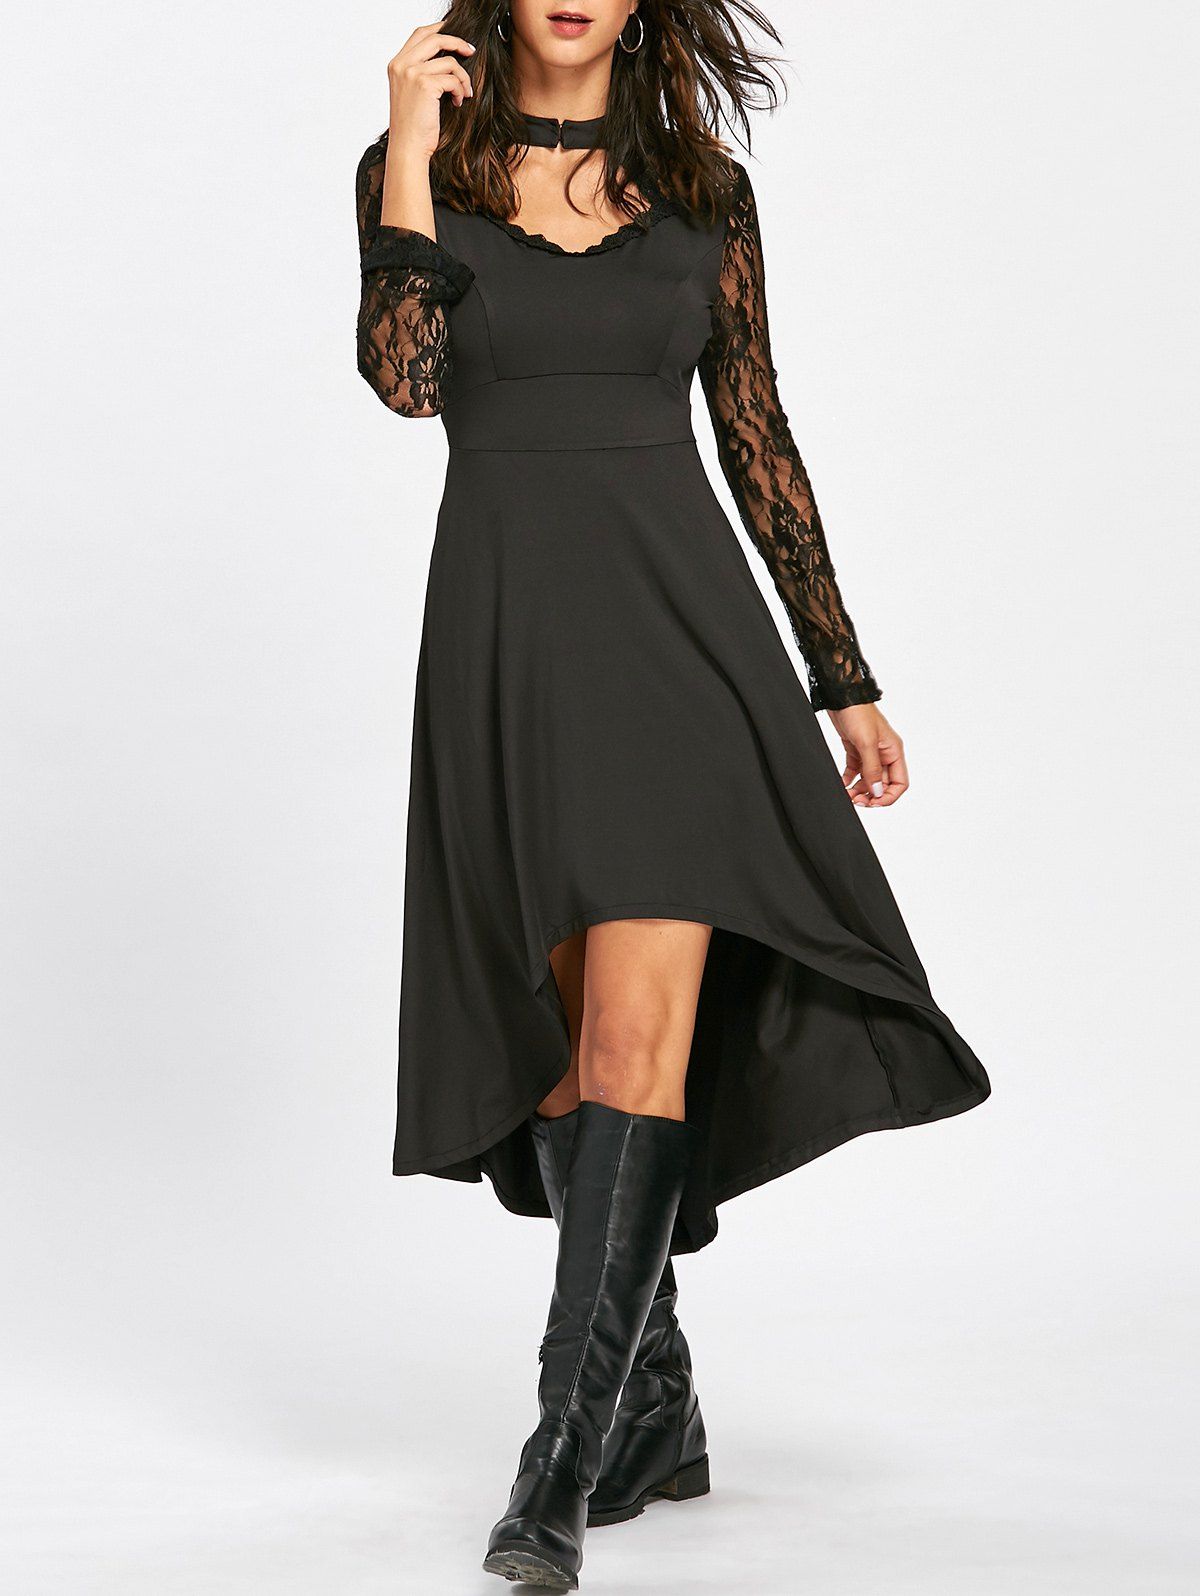 Mock Neck High Low Dress with Lace - BLACK L